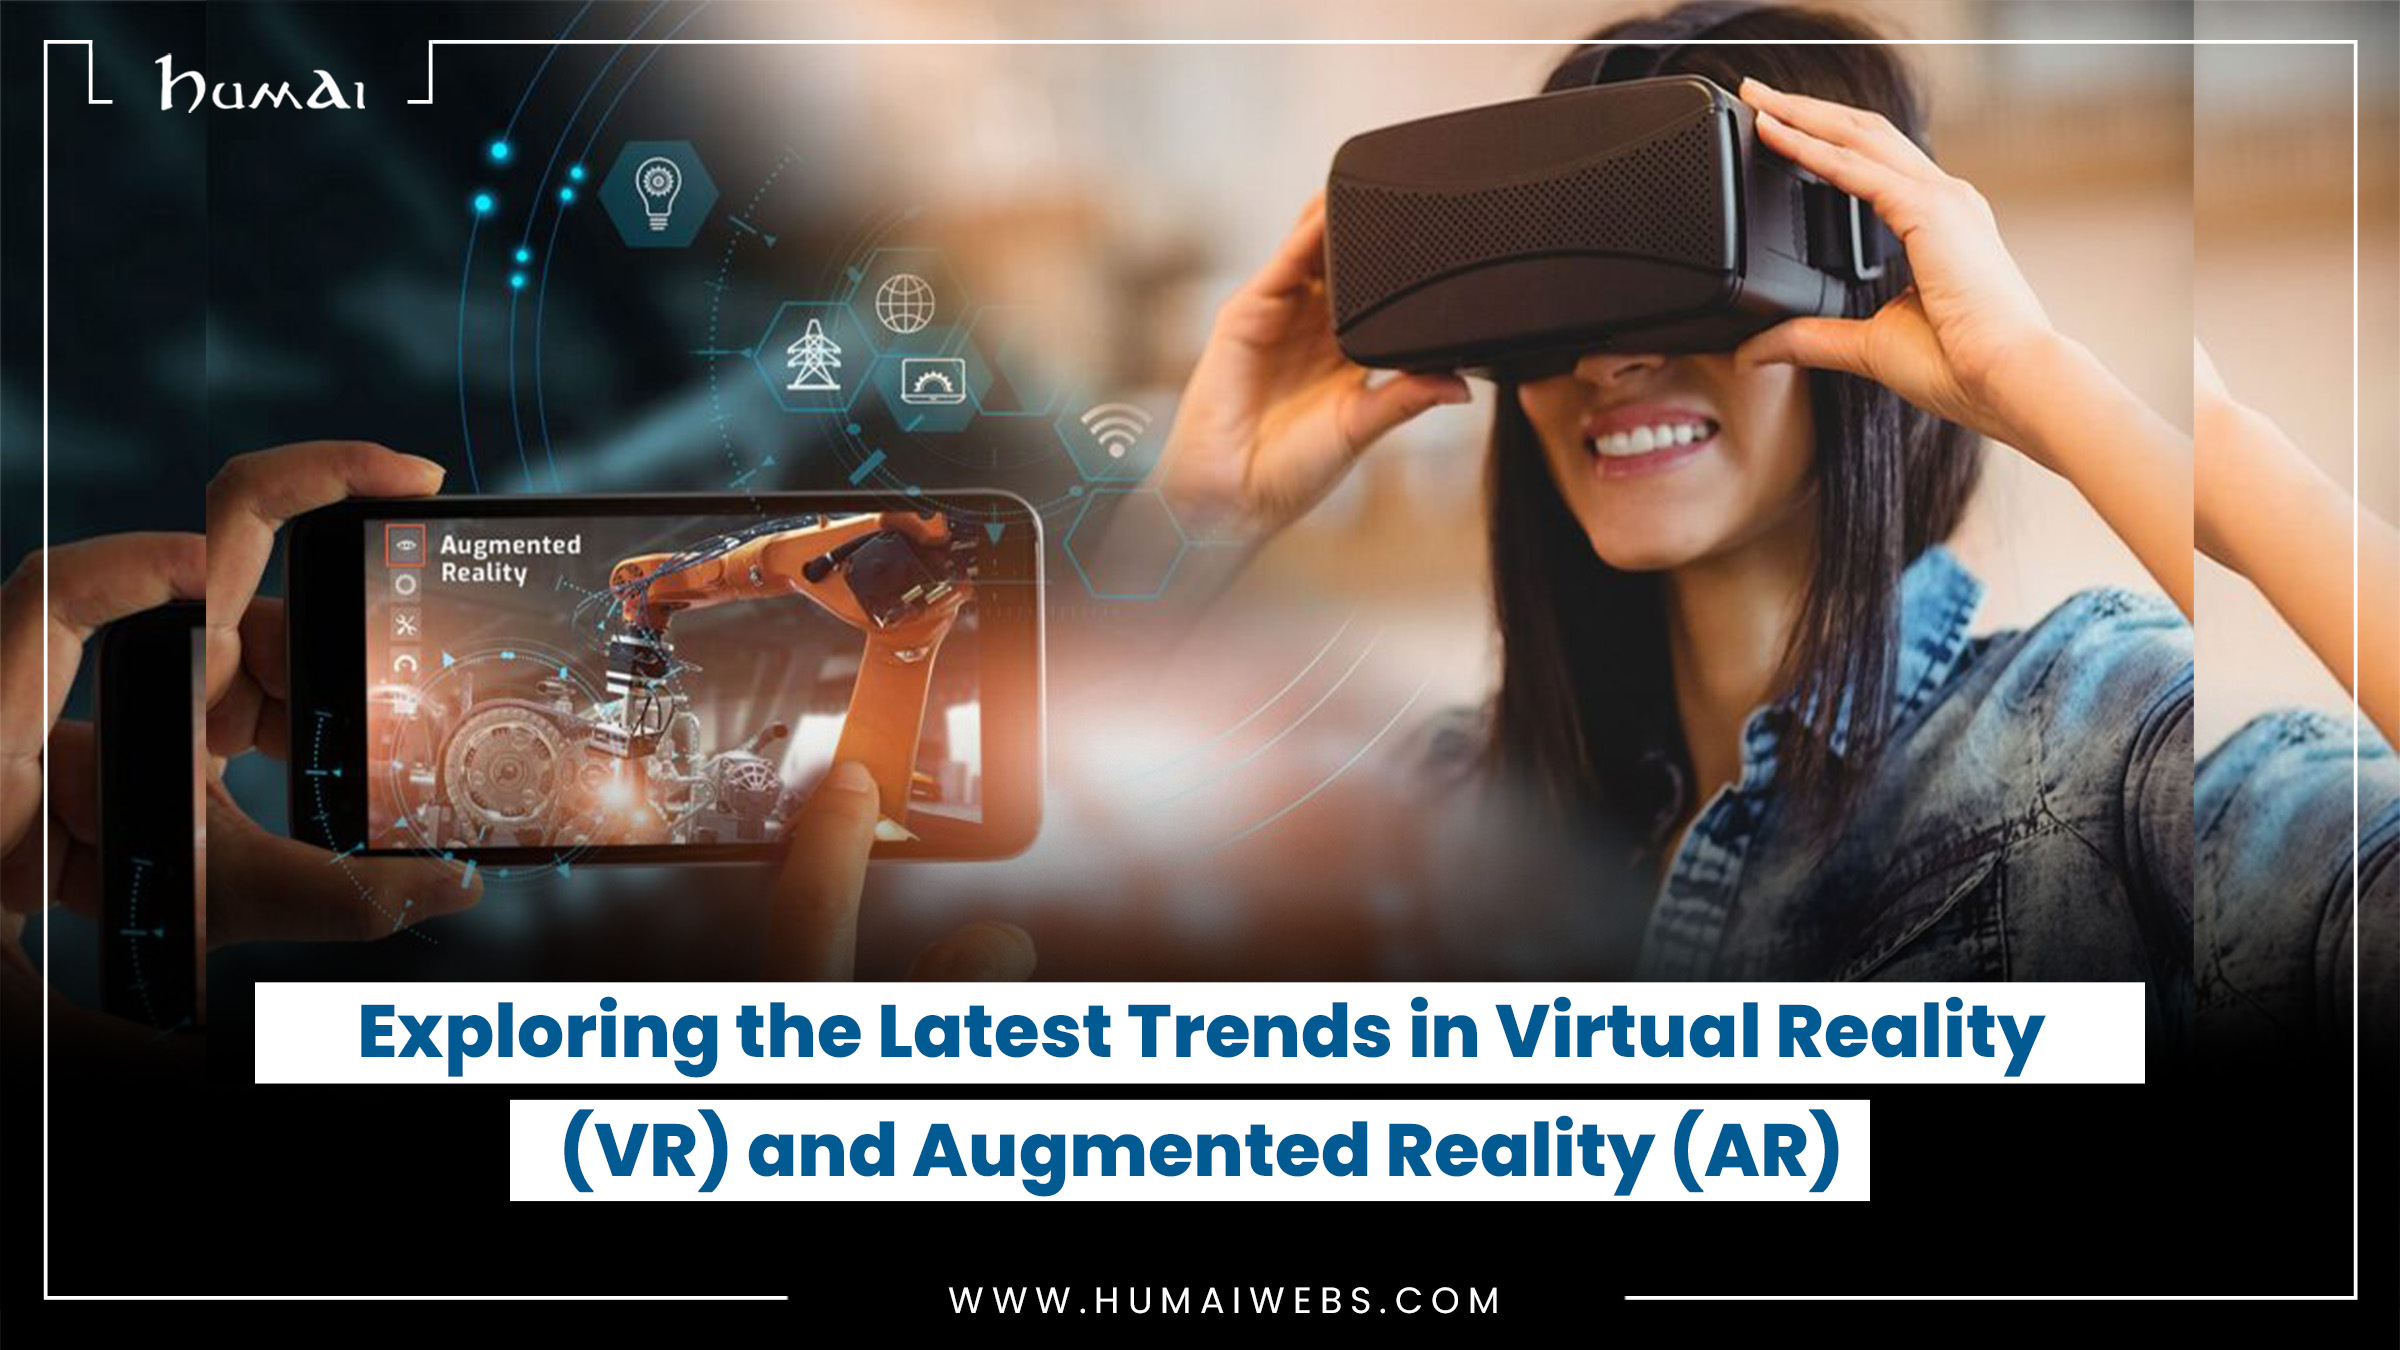 Exploring the Latest Trends in Virtual Reality (VR) and Augmented Reality (AR)